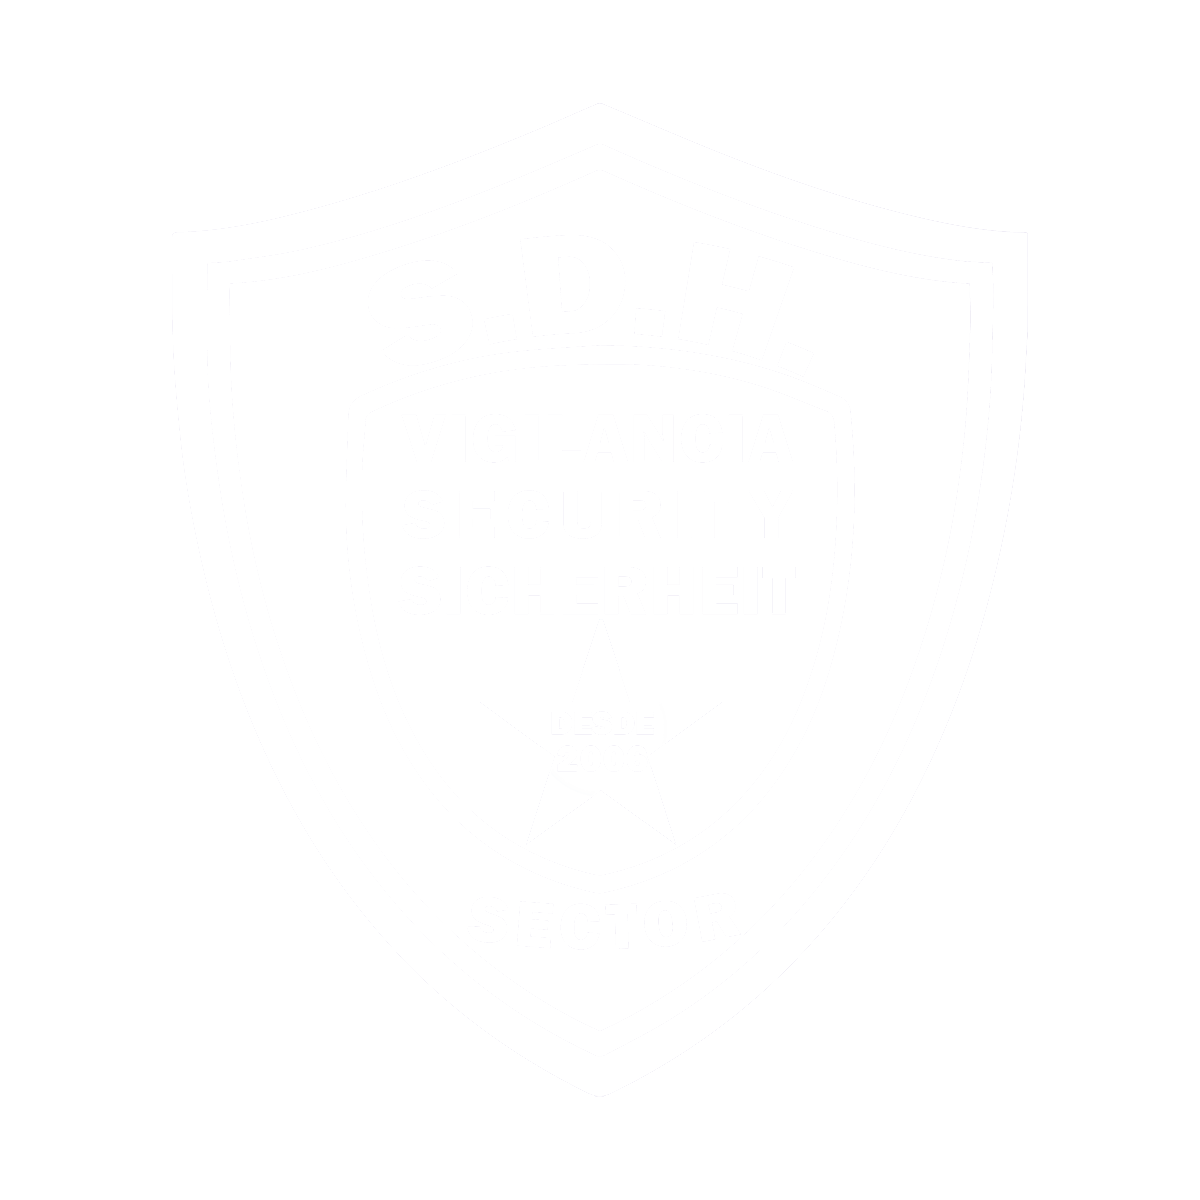 SDH SECTOR SECURITY & SERVICE